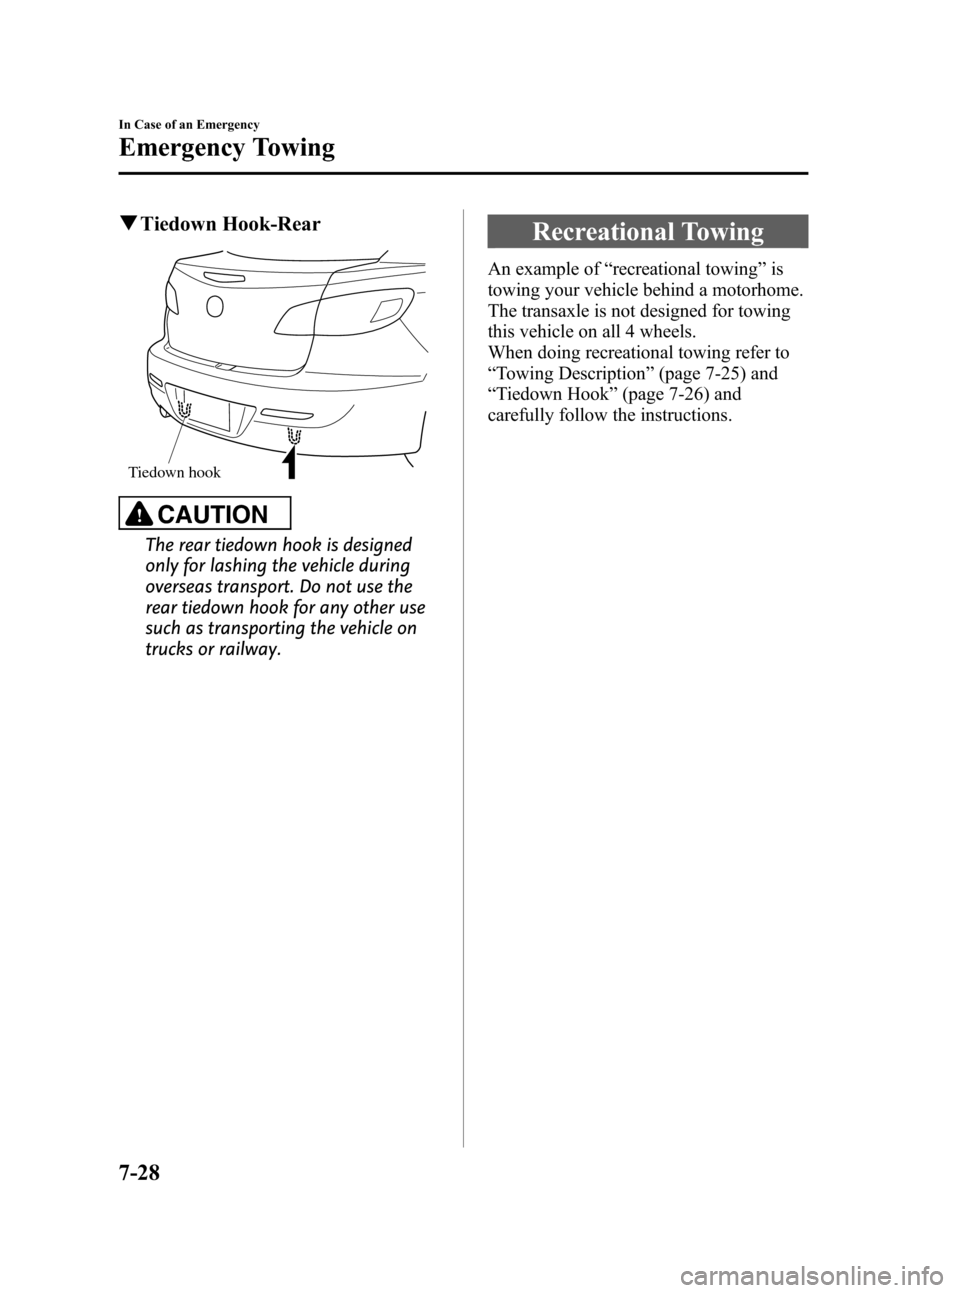 MAZDA MODEL 3 HATCHBACK 2012  Owners Manual (in English) Black plate (382,1)
qTiedown Hook-Rear
Tiedown hook
CAUTION
The rear tiedown hook is designed
only for lashing the vehicle during
overseas transport. Do not use the
rear tiedown hook for any other use